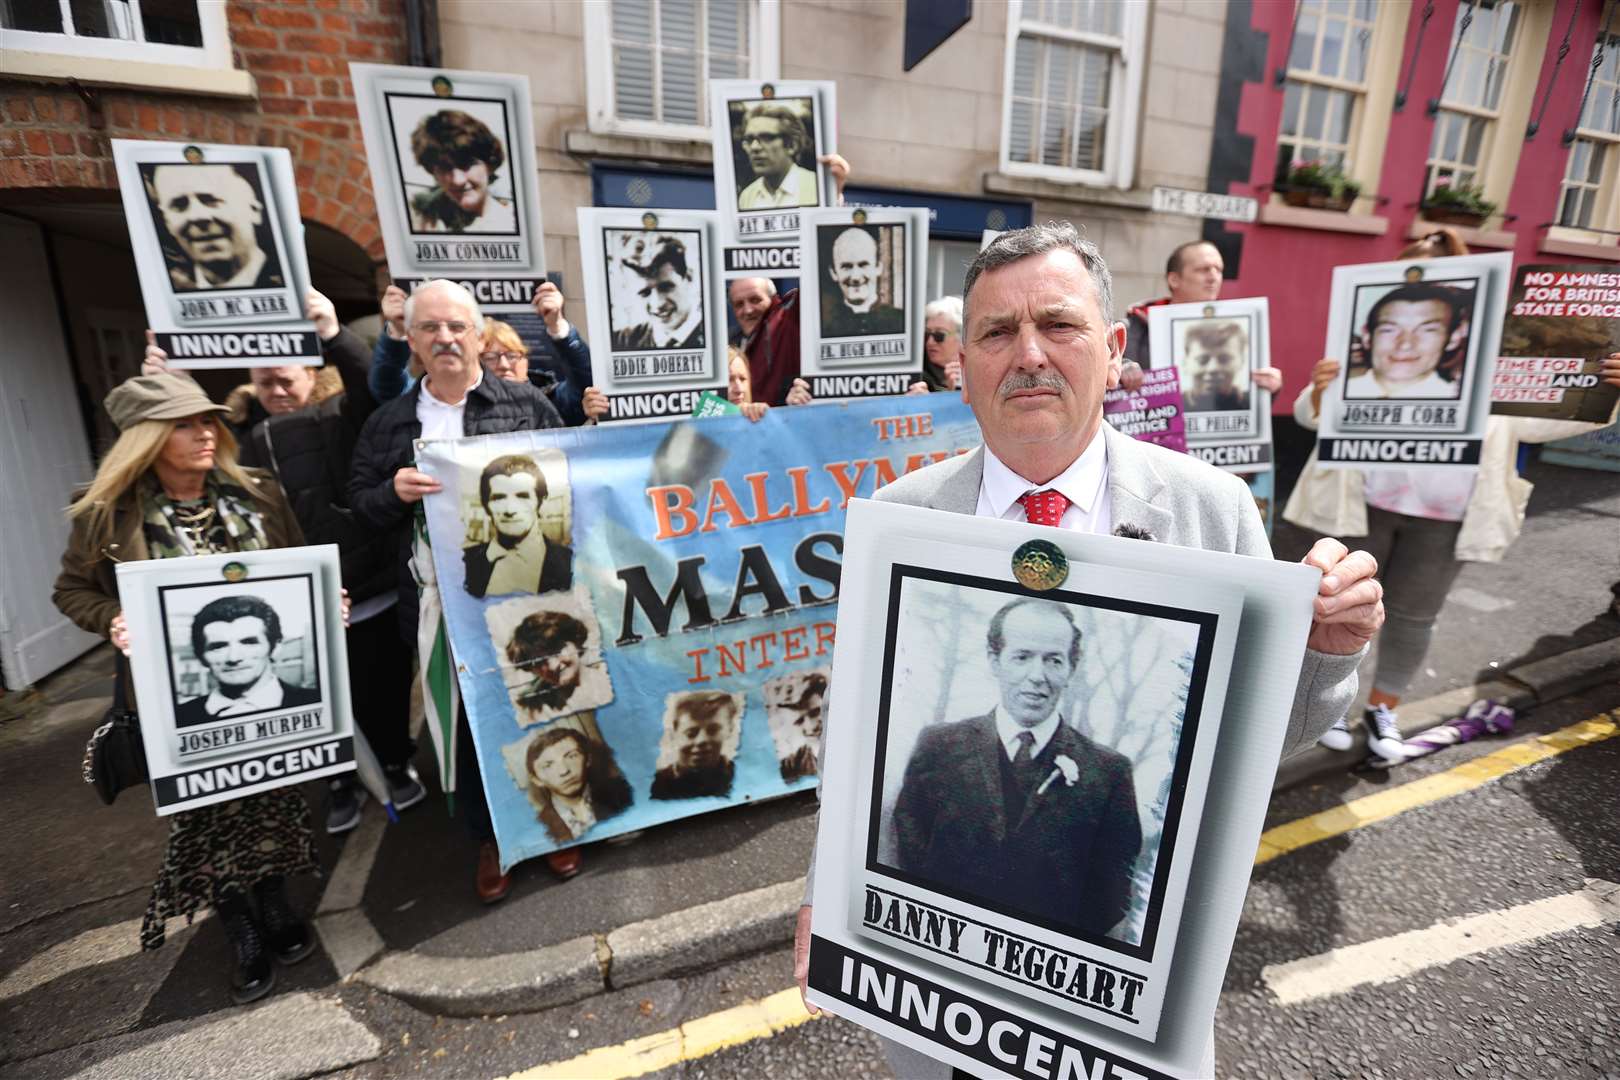 John Teggart, son of victim Daniel Teggart, demonstrating with some of the families of the 11 people killed by soldiers in Ballymurphy in west Belfast in 1971, outside Hillsborough Castle (Liam McBurney/PA)